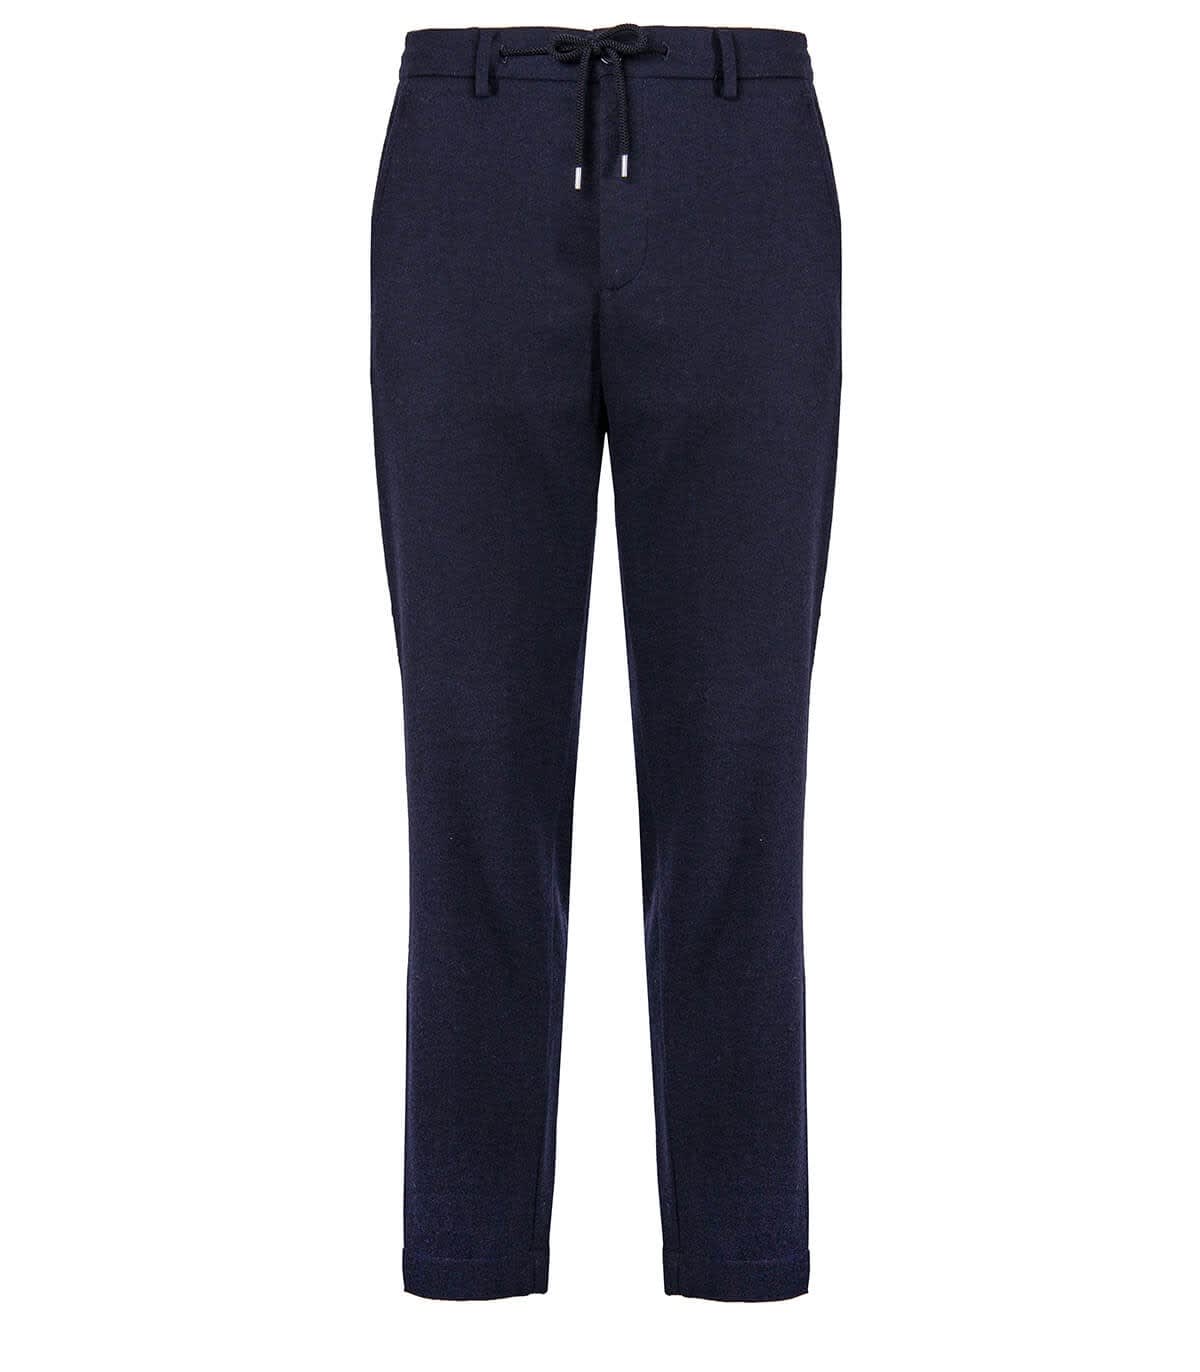 Department Five Department 5 Jobsy Navy Blue Chino Trousers